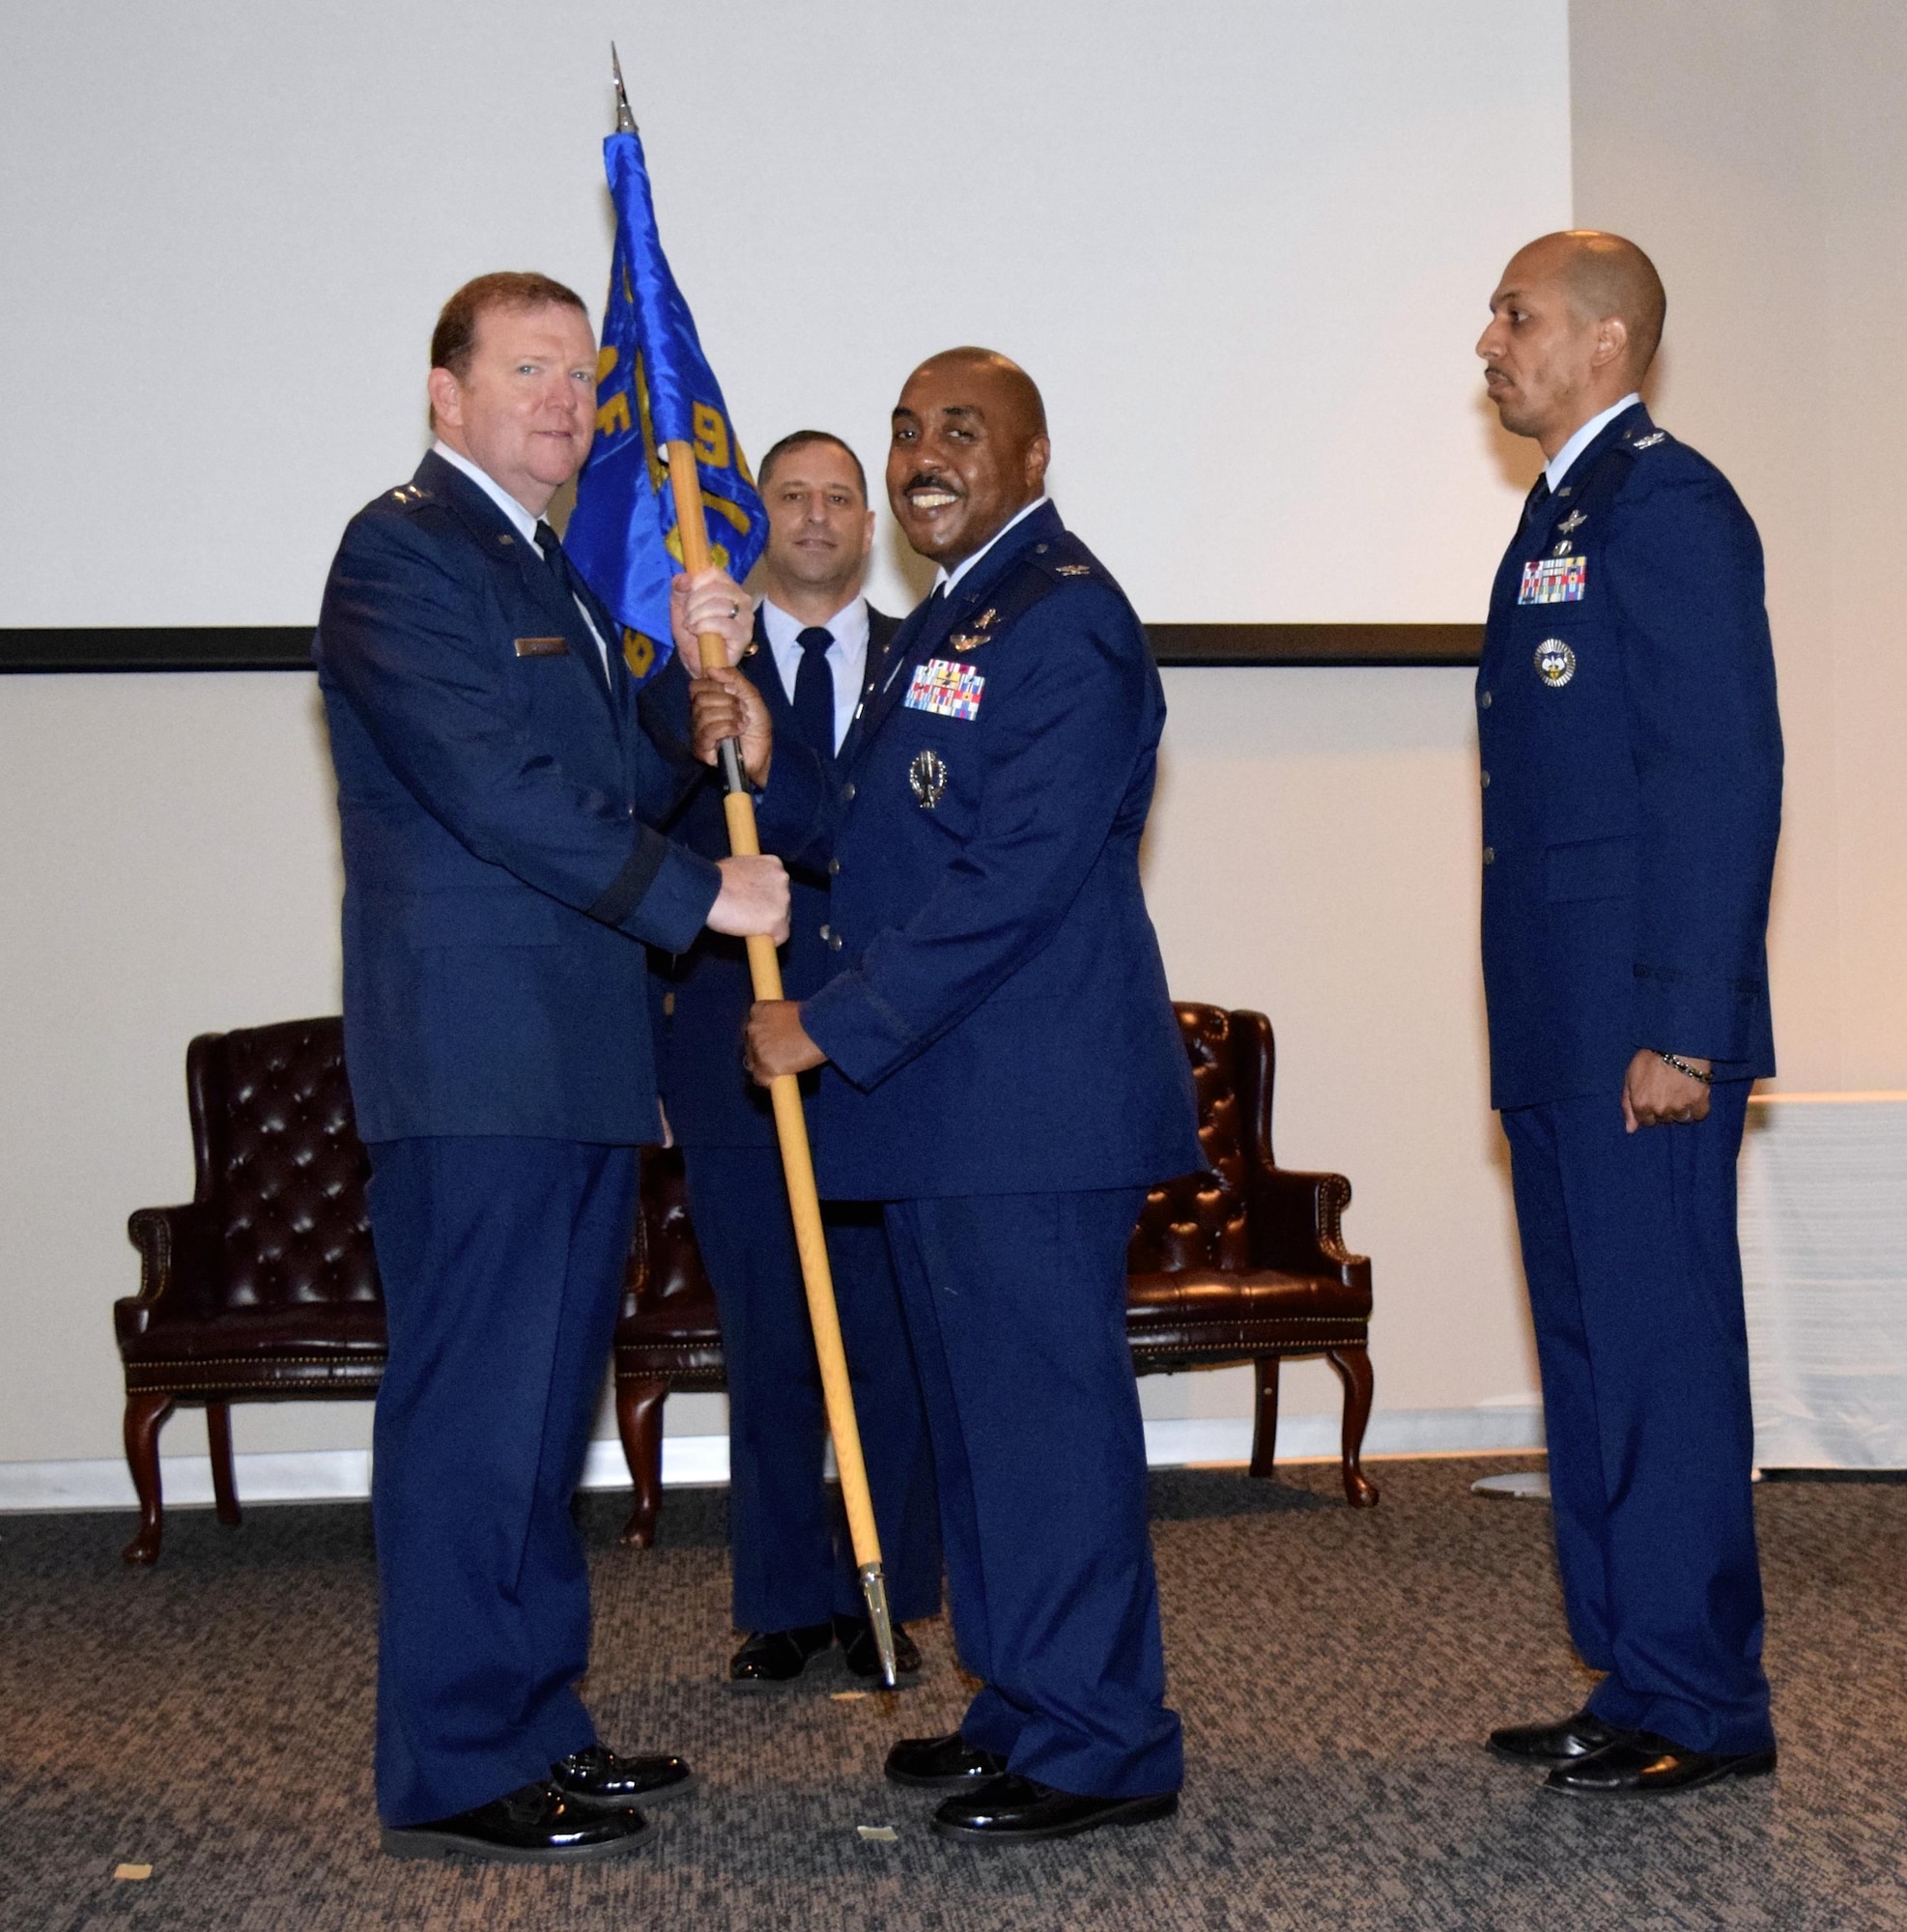 Maj. Gen. Richard Scobee, 10th Air Force commander, receives the 960th Cyberspace Operations Group flag from Col. Lloyd I. Terry, Jr. as Col. Anthony M. Perkins stands ready to receive it and assume command of the unit, while Chief Master Sgt. Thomas Africano, 960th CyOG superintendent looks on. Terry relinquished command after serving three years at the helm during a change of command ceremony held Aug. 27 at the Inter-American Air Forces Academy at Joint Base San Antonio-Lackland, Texas. (U.S. Air Force photo by Maj. Alysia R. Harvey) 